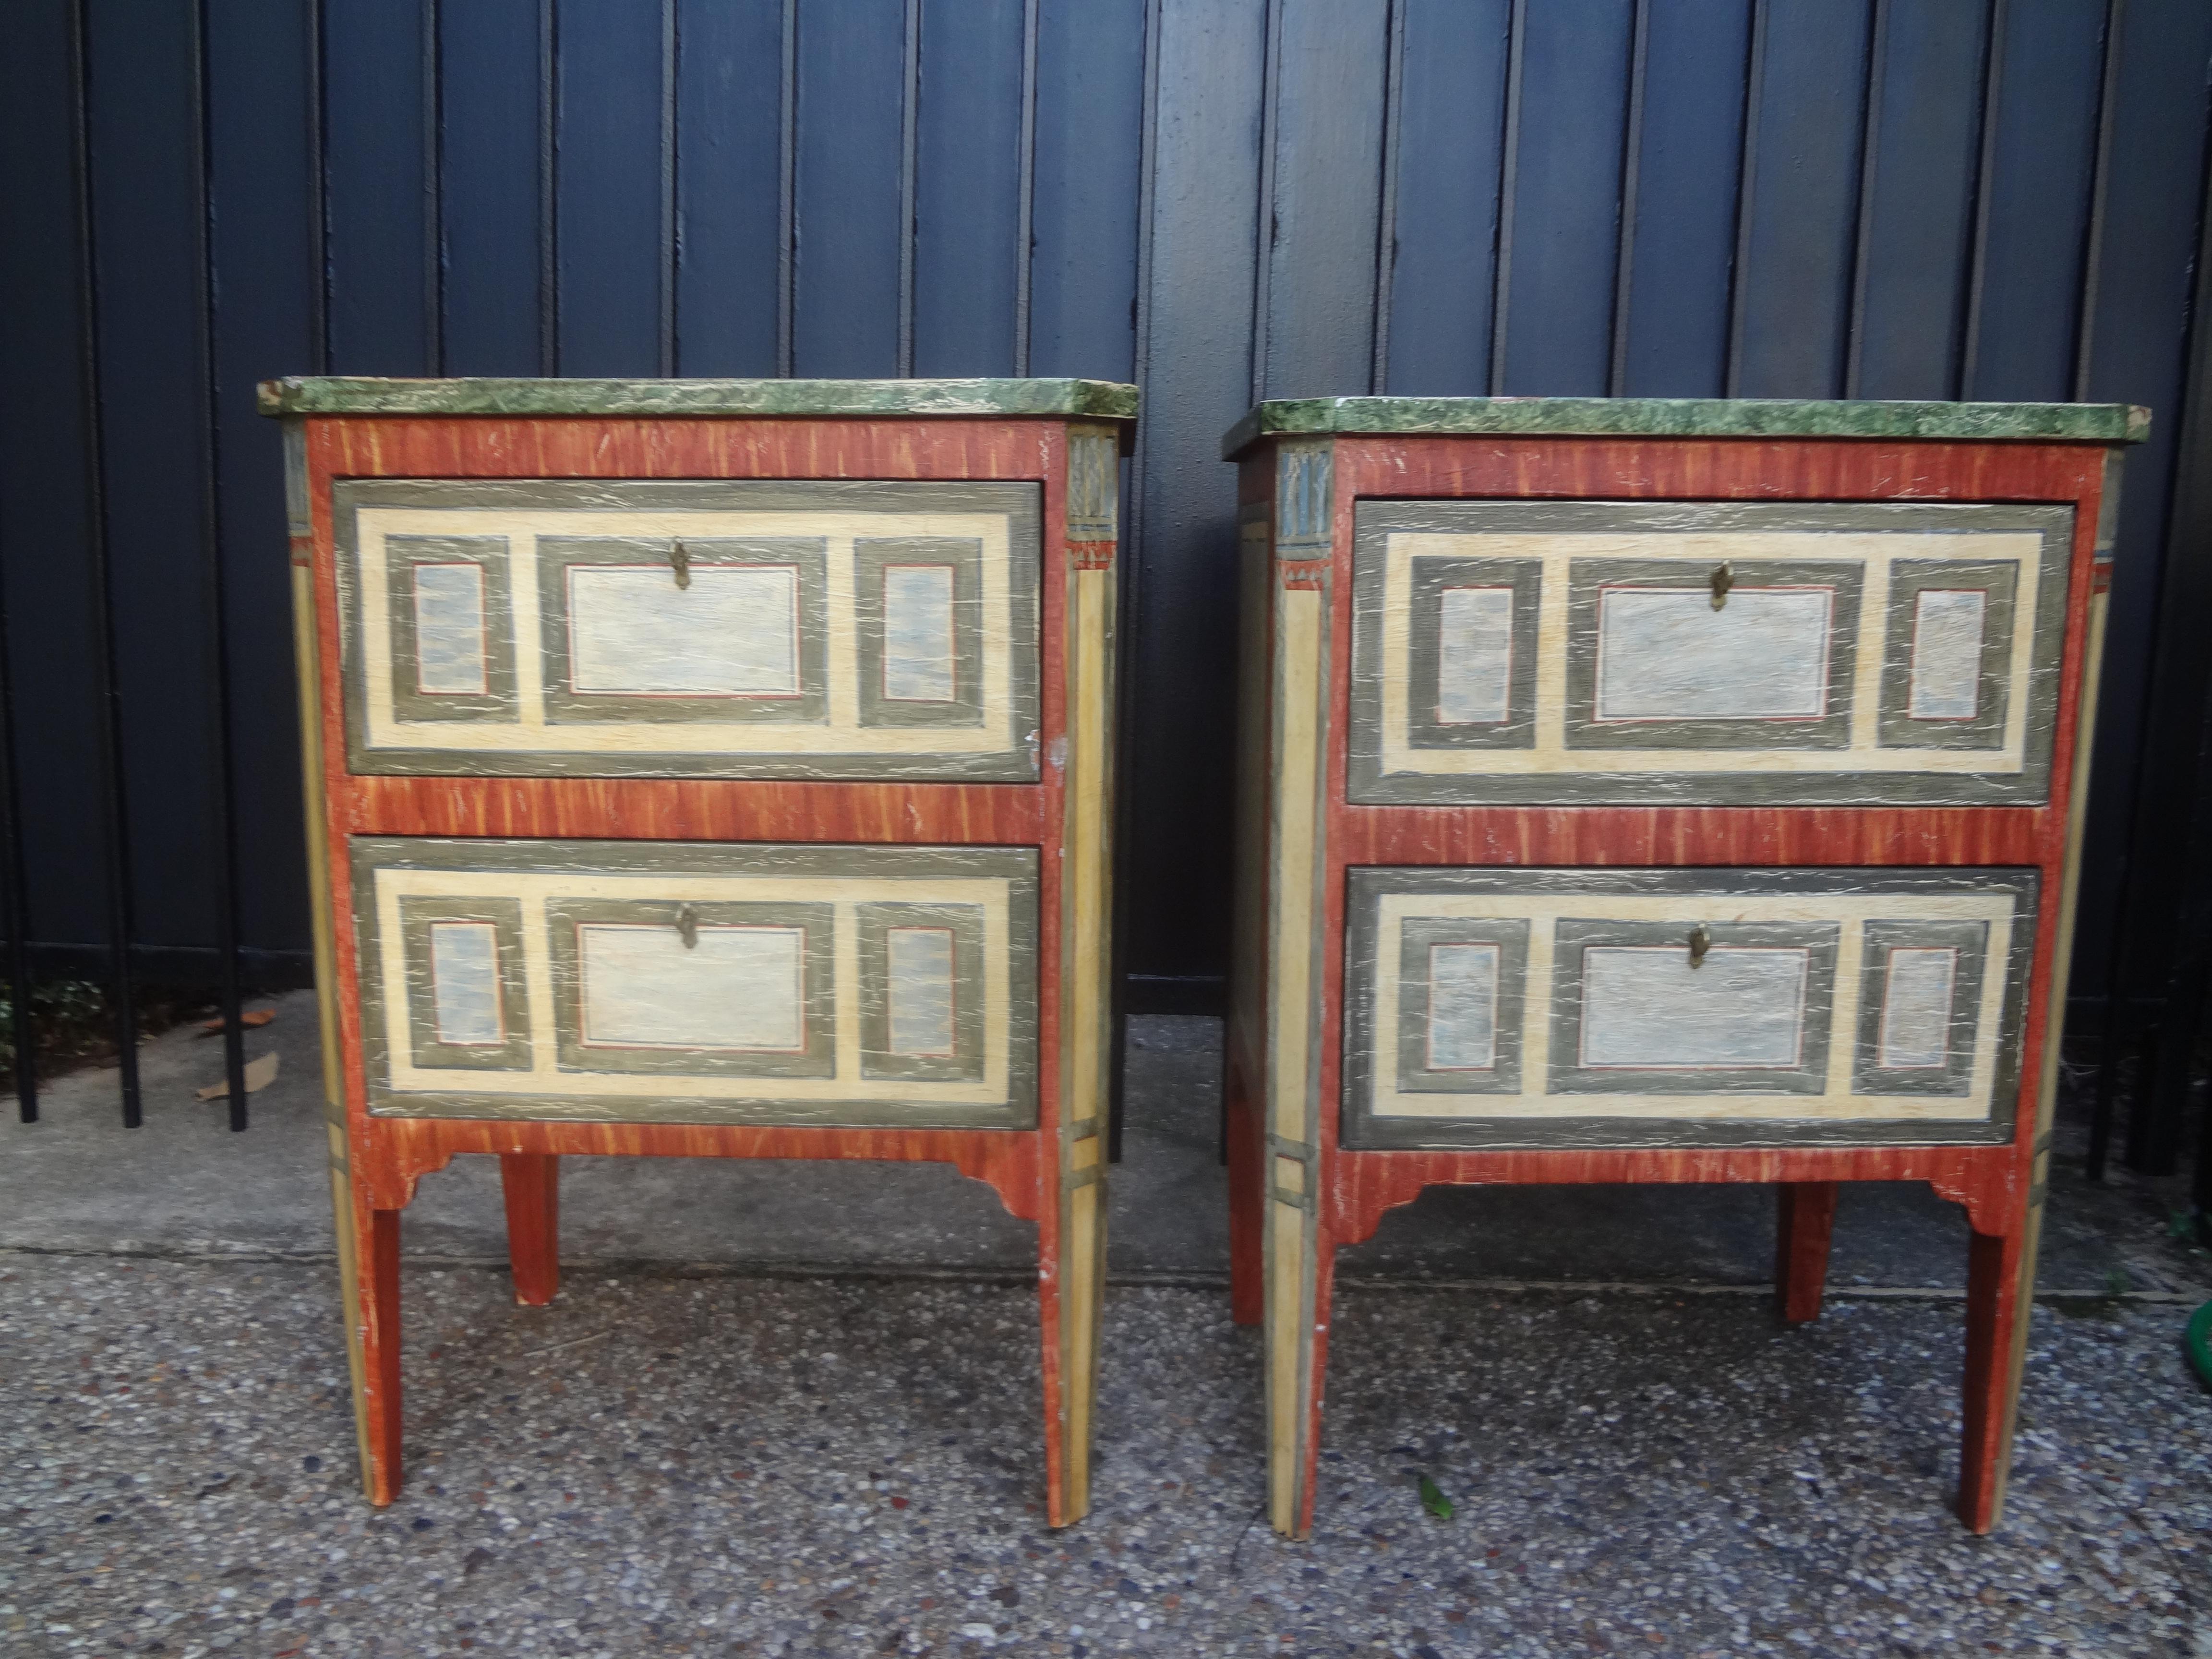 Pair of Italian faux marble painted chests, commodes or commodini. This versatile pair of Italian Louis XVI style painted chests would work well in a living area or as bedside tables, nightstands or chests. Stunning!